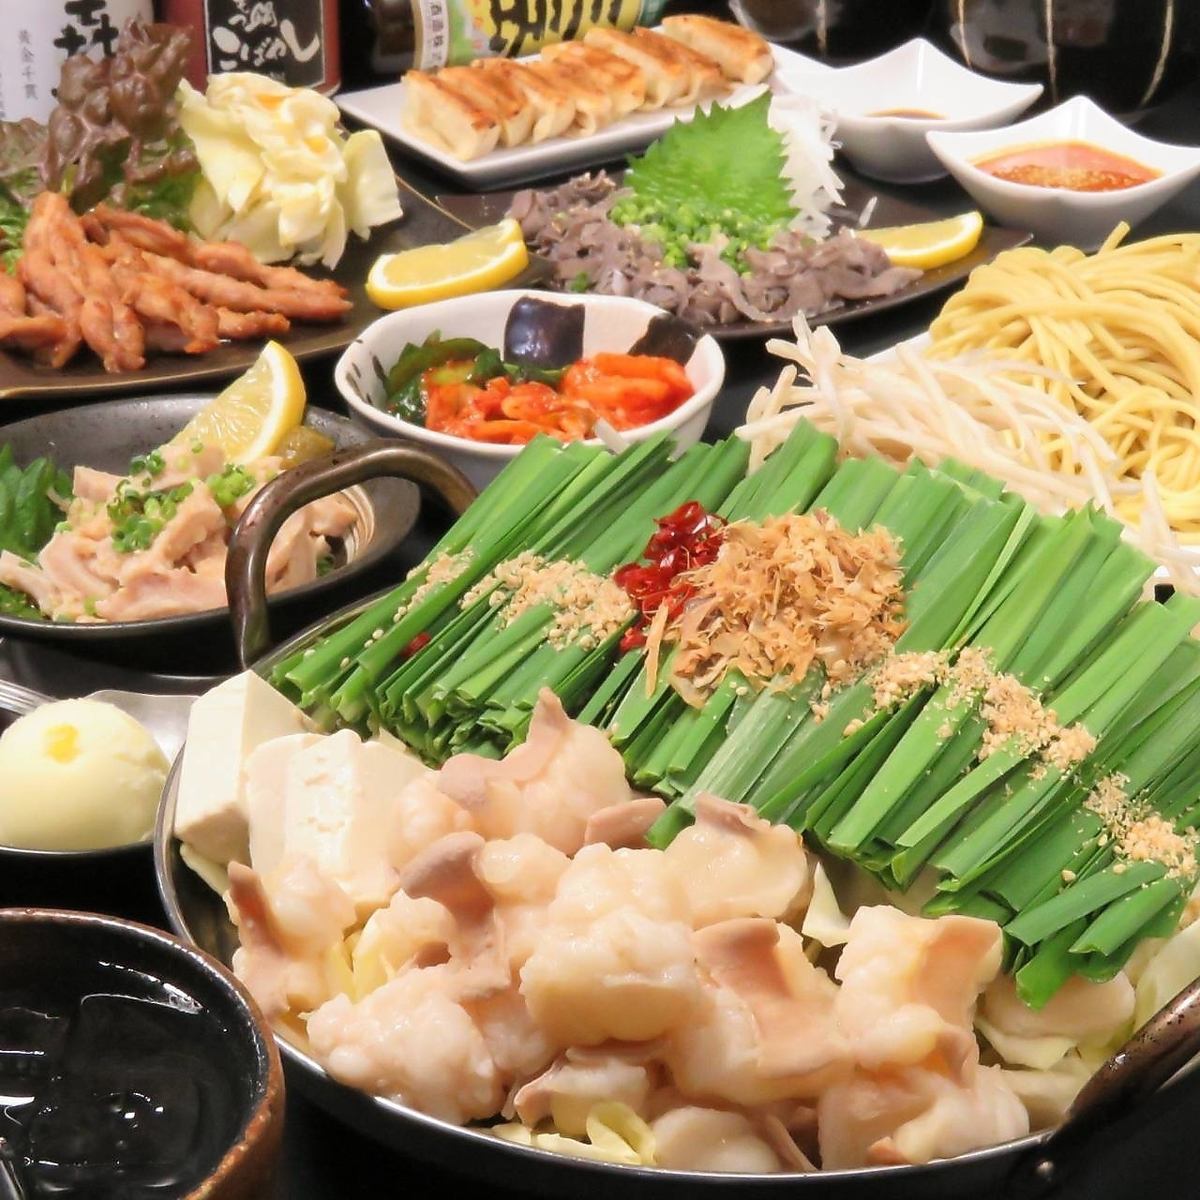 The must-see dishes such as jjigae offal hot pot and offal cheese grill are very popular with women.